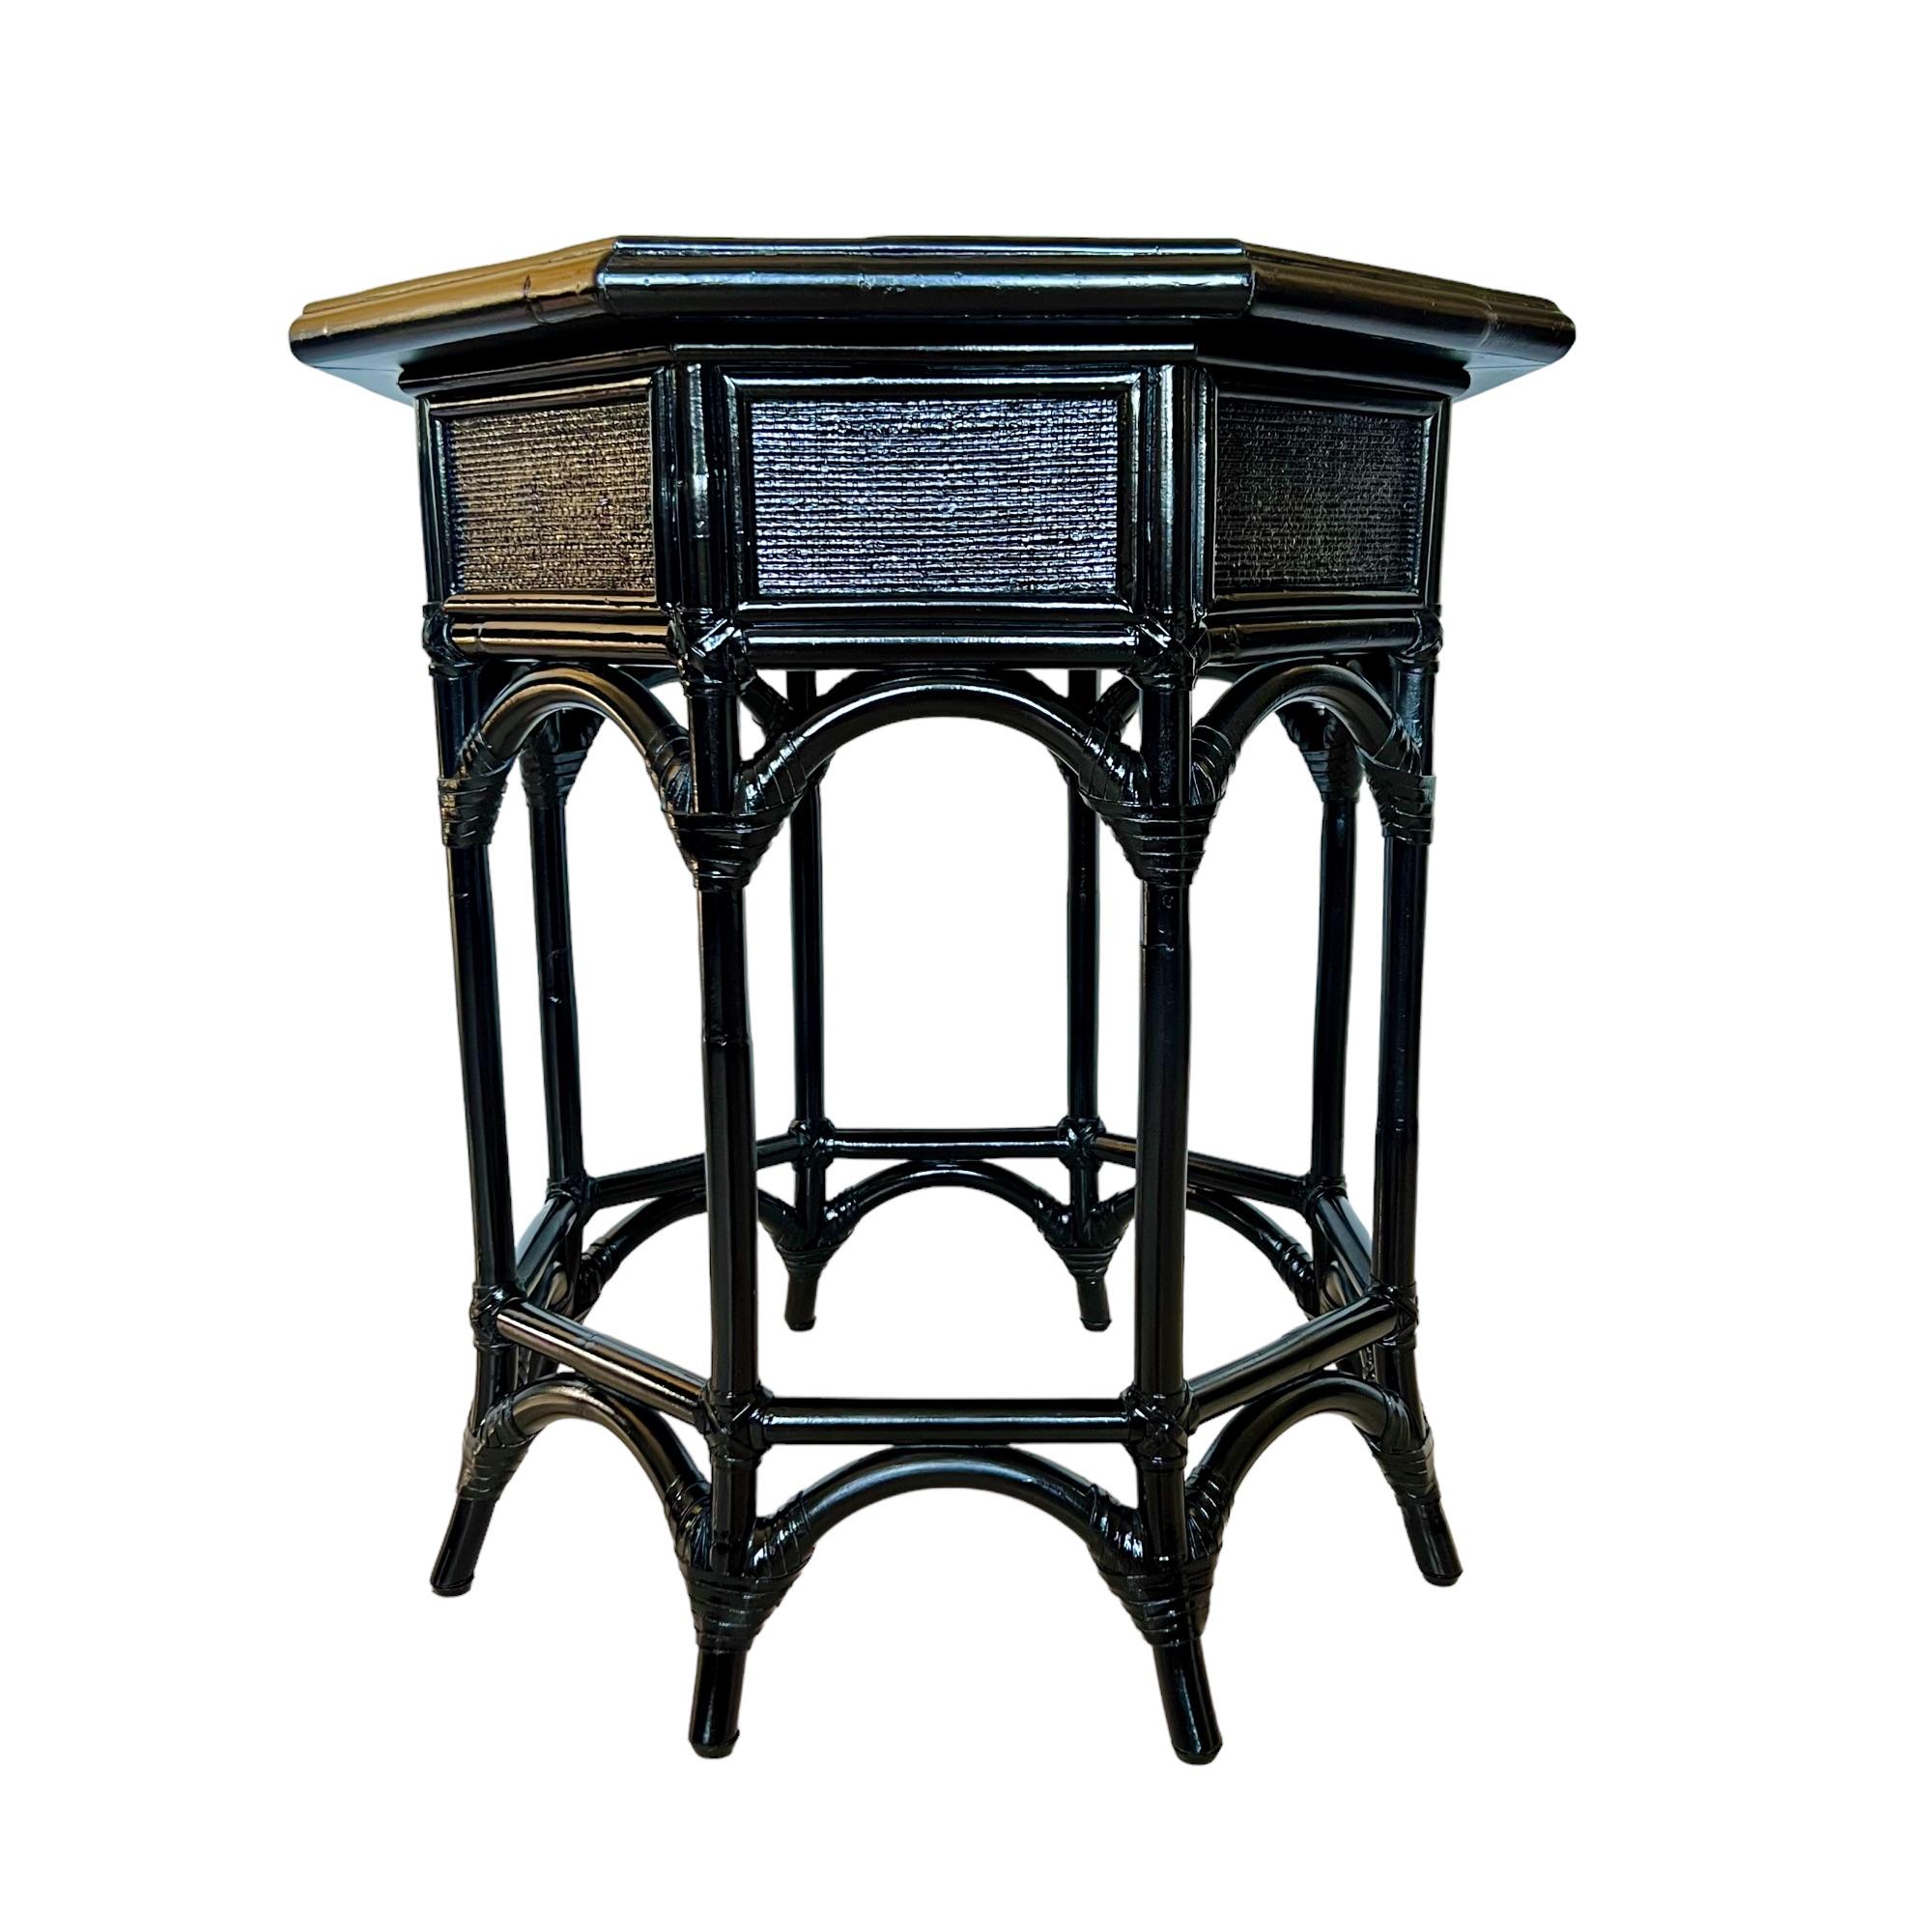 Vintage Refinished Black Rattan Resin Top Octagon Side Tables, a Pair For Sale 2